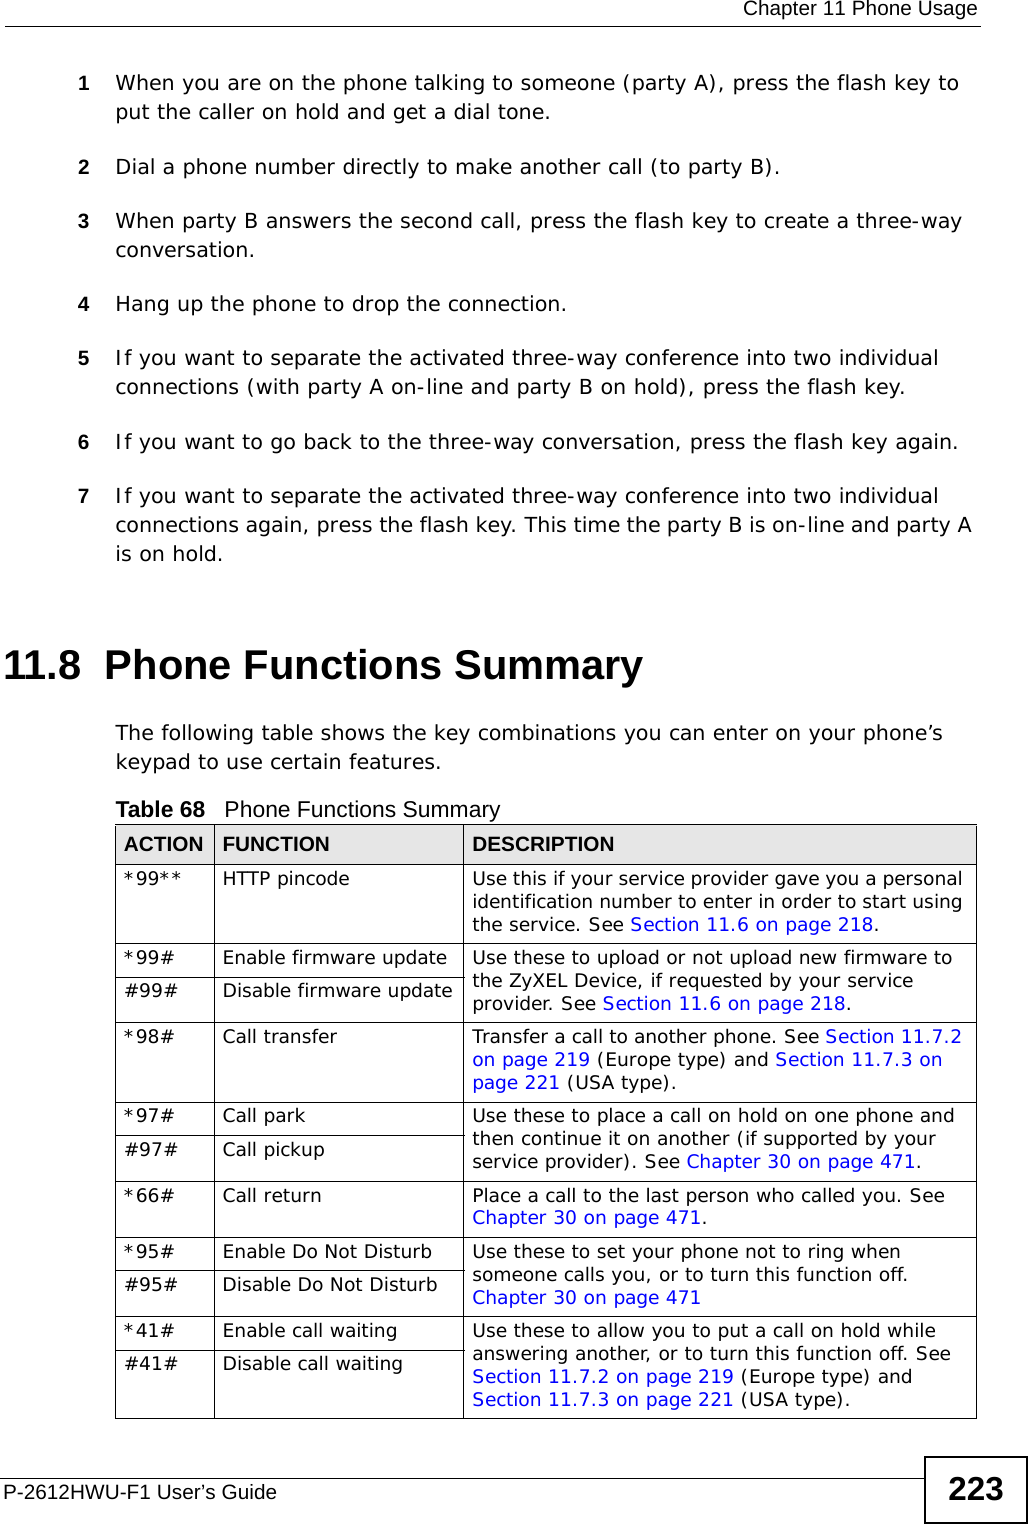  Chapter 11 Phone UsageP-2612HWU-F1 User’s Guide 2231When you are on the phone talking to someone (party A), press the flash key to put the caller on hold and get a dial tone. 2Dial a phone number directly to make another call (to party B).3When party B answers the second call, press the flash key to create a three-way conversation.4Hang up the phone to drop the connection.5If you want to separate the activated three-way conference into two individual connections (with party A on-line and party B on hold), press the flash key.  6If you want to go back to the three-way conversation, press the flash key again.7If you want to separate the activated three-way conference into two individual connections again, press the flash key. This time the party B is on-line and party A is on hold.  11.8  Phone Functions SummaryThe following table shows the key combinations you can enter on your phone’s keypad to use certain features. Table 68   Phone Functions SummaryACTION FUNCTION DESCRIPTION*99**  HTTP pincode Use this if your service provider gave you a personal identification number to enter in order to start using the service. See Section 11.6 on page 218.*99#  Enable firmware update Use these to upload or not upload new firmware to the ZyXEL Device, if requested by your service provider. See Section 11.6 on page 218.#99# Disable firmware update*98#  Call transfer Transfer a call to another phone. See Section 11.7.2 on page 219 (Europe type) and Section 11.7.3 on page 221 (USA type).*97#  Call park Use these to place a call on hold on one phone and then continue it on another (if supported by your service provider). See Chapter 30 on page 471.#97# Call pickup*66# Call return Place a call to the last person who called you. See Chapter 30 on page 471.*95# Enable Do Not Disturb Use these to set your phone not to ring when someone calls you, or to turn this function off. Chapter 30 on page 471#95# Disable Do Not Disturb*41# Enable call waiting Use these to allow you to put a call on hold while answering another, or to turn this function off. See Section 11.7.2 on page 219 (Europe type) and Section 11.7.3 on page 221 (USA type).#41# Disable call waiting